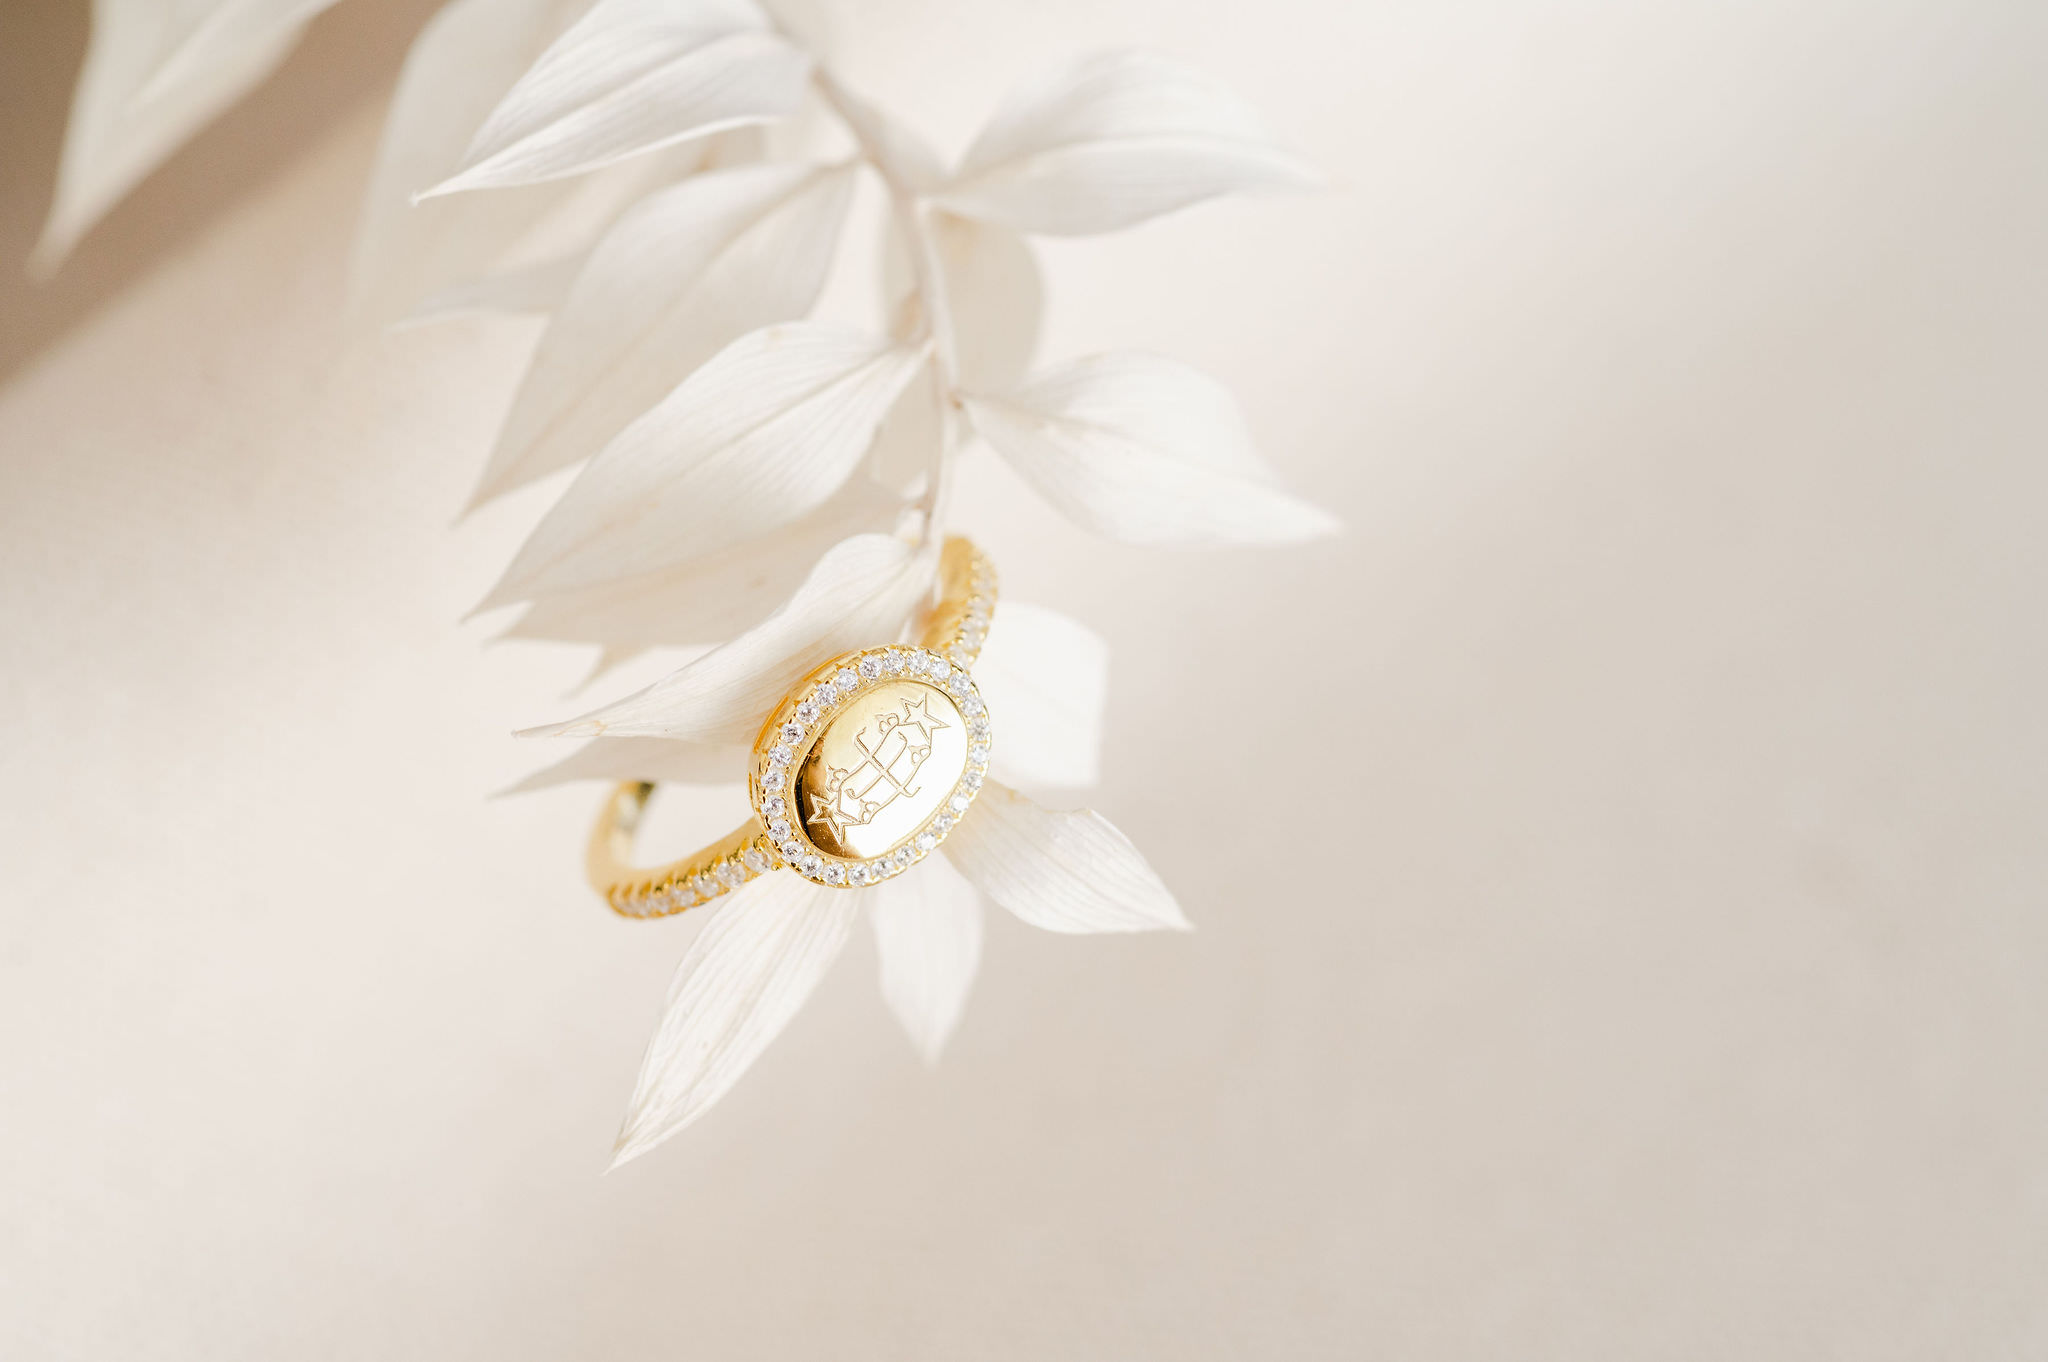 a Bahai ring on a white floral stem.